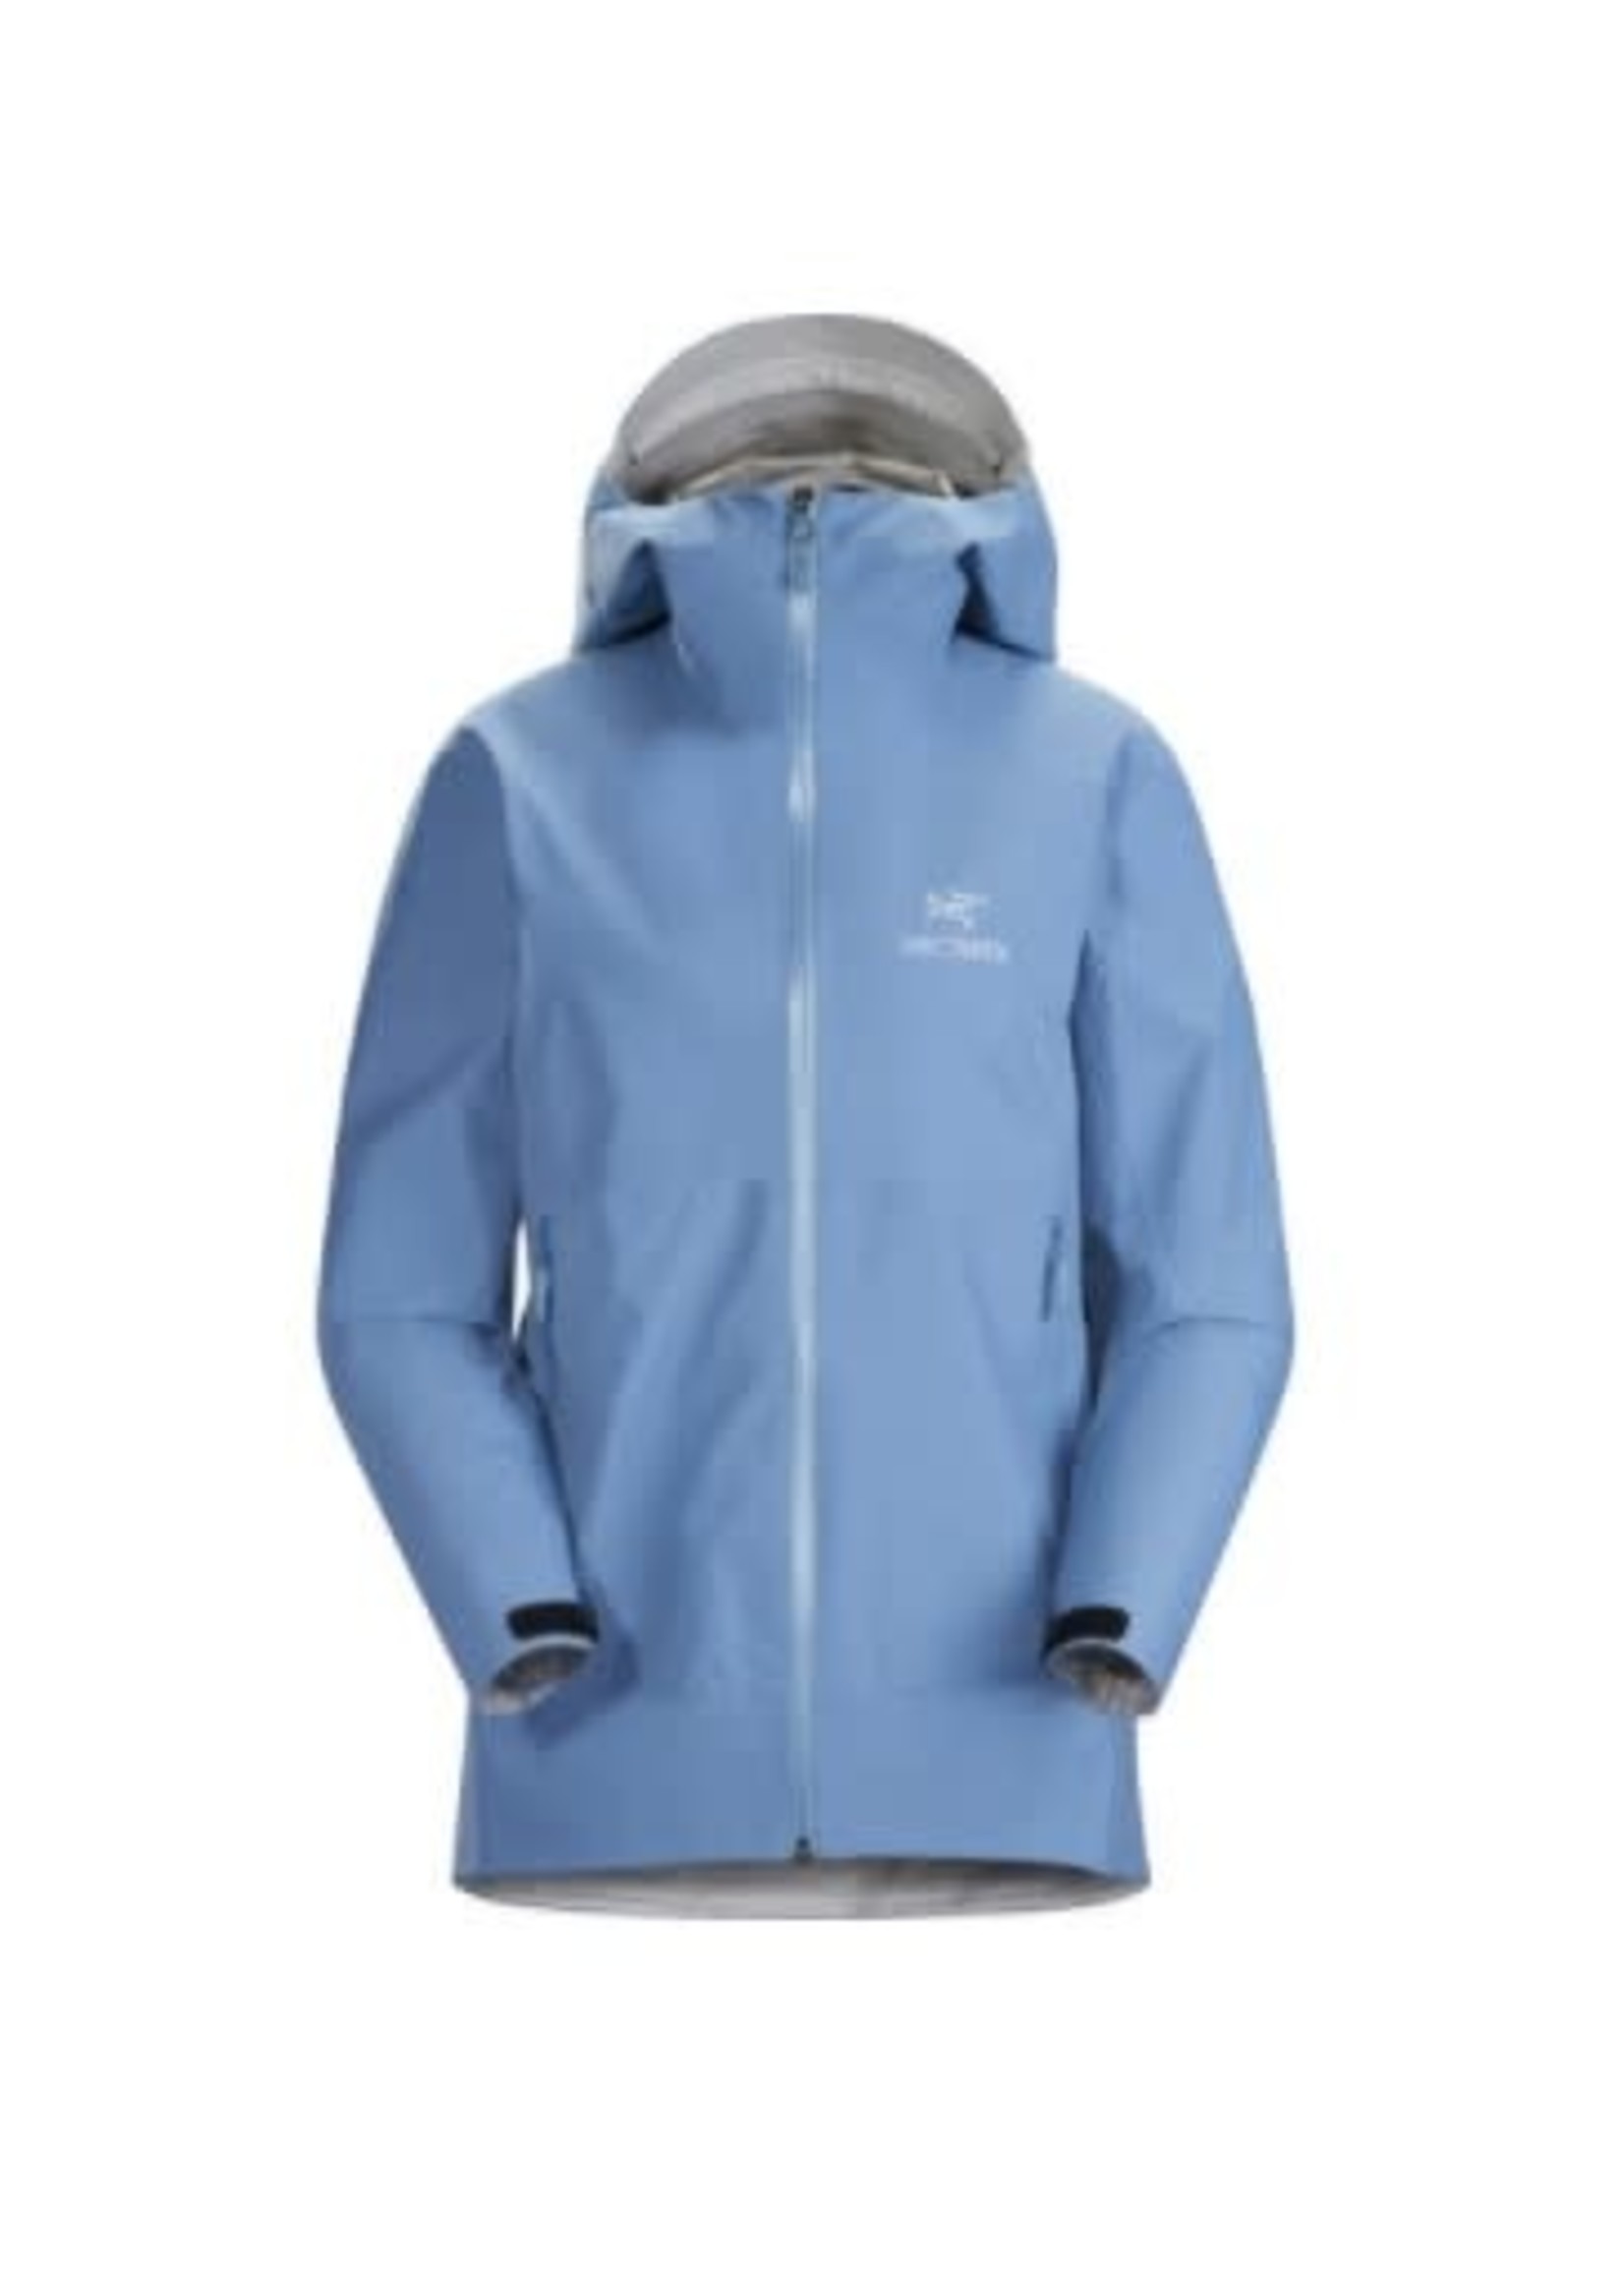 Womens Zeta SL Jacket - Tampa Bay Outfitters